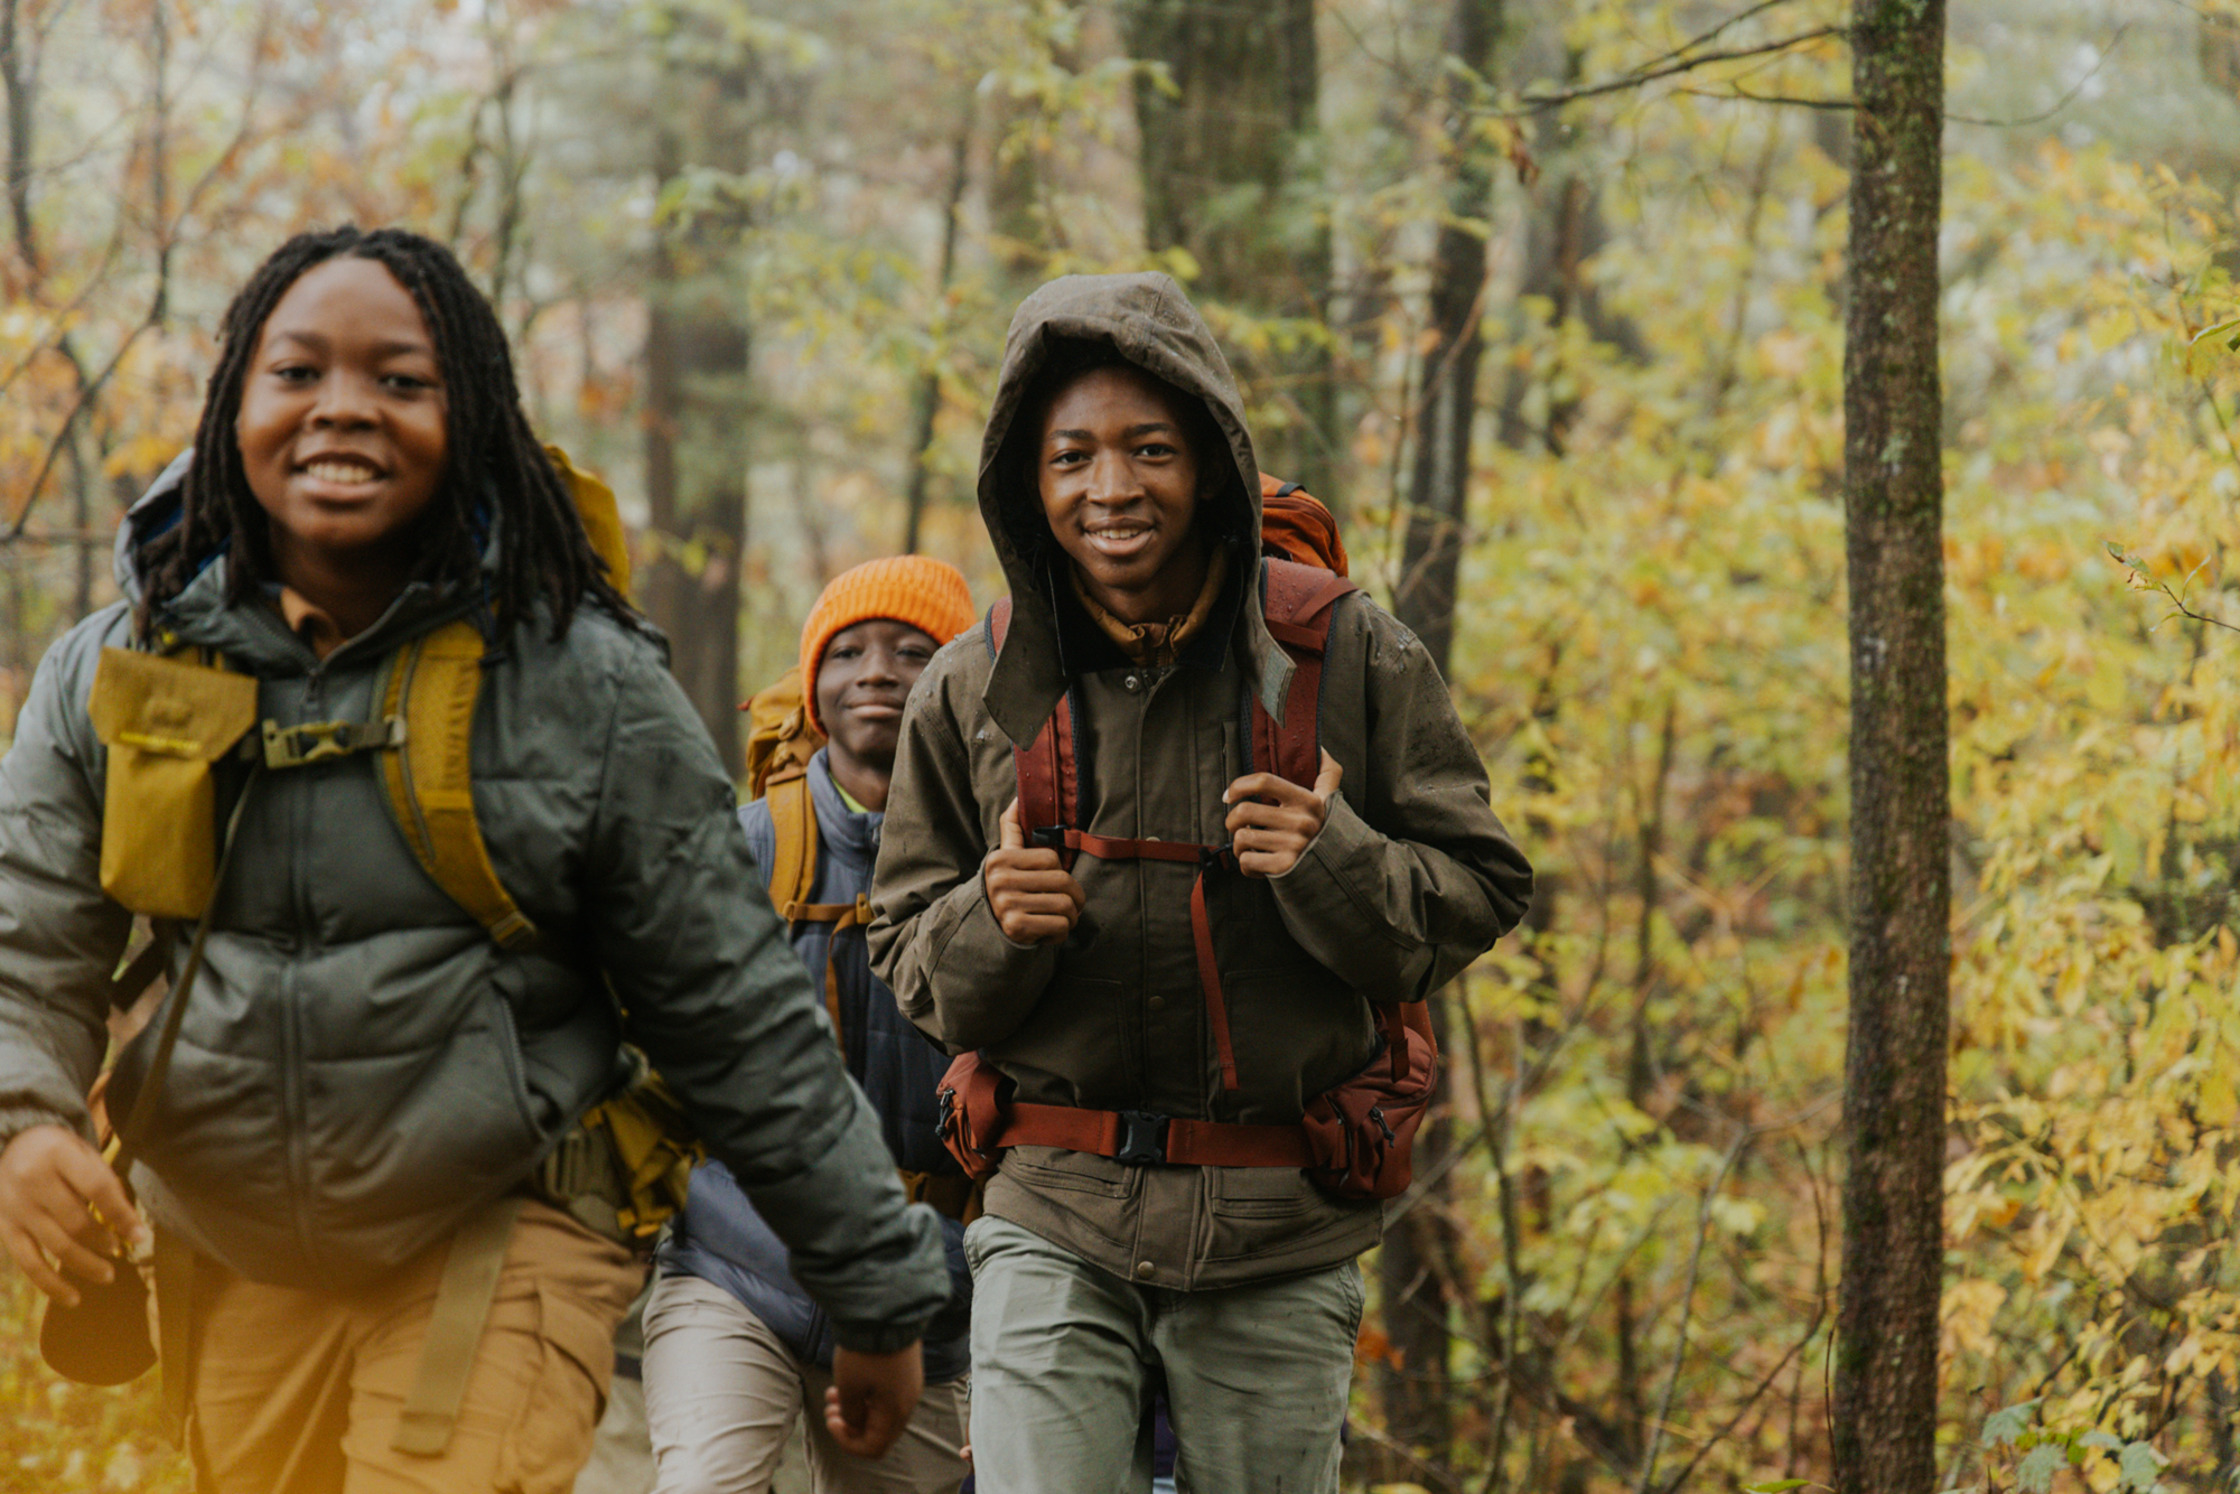 a group of young people hiking in the woods